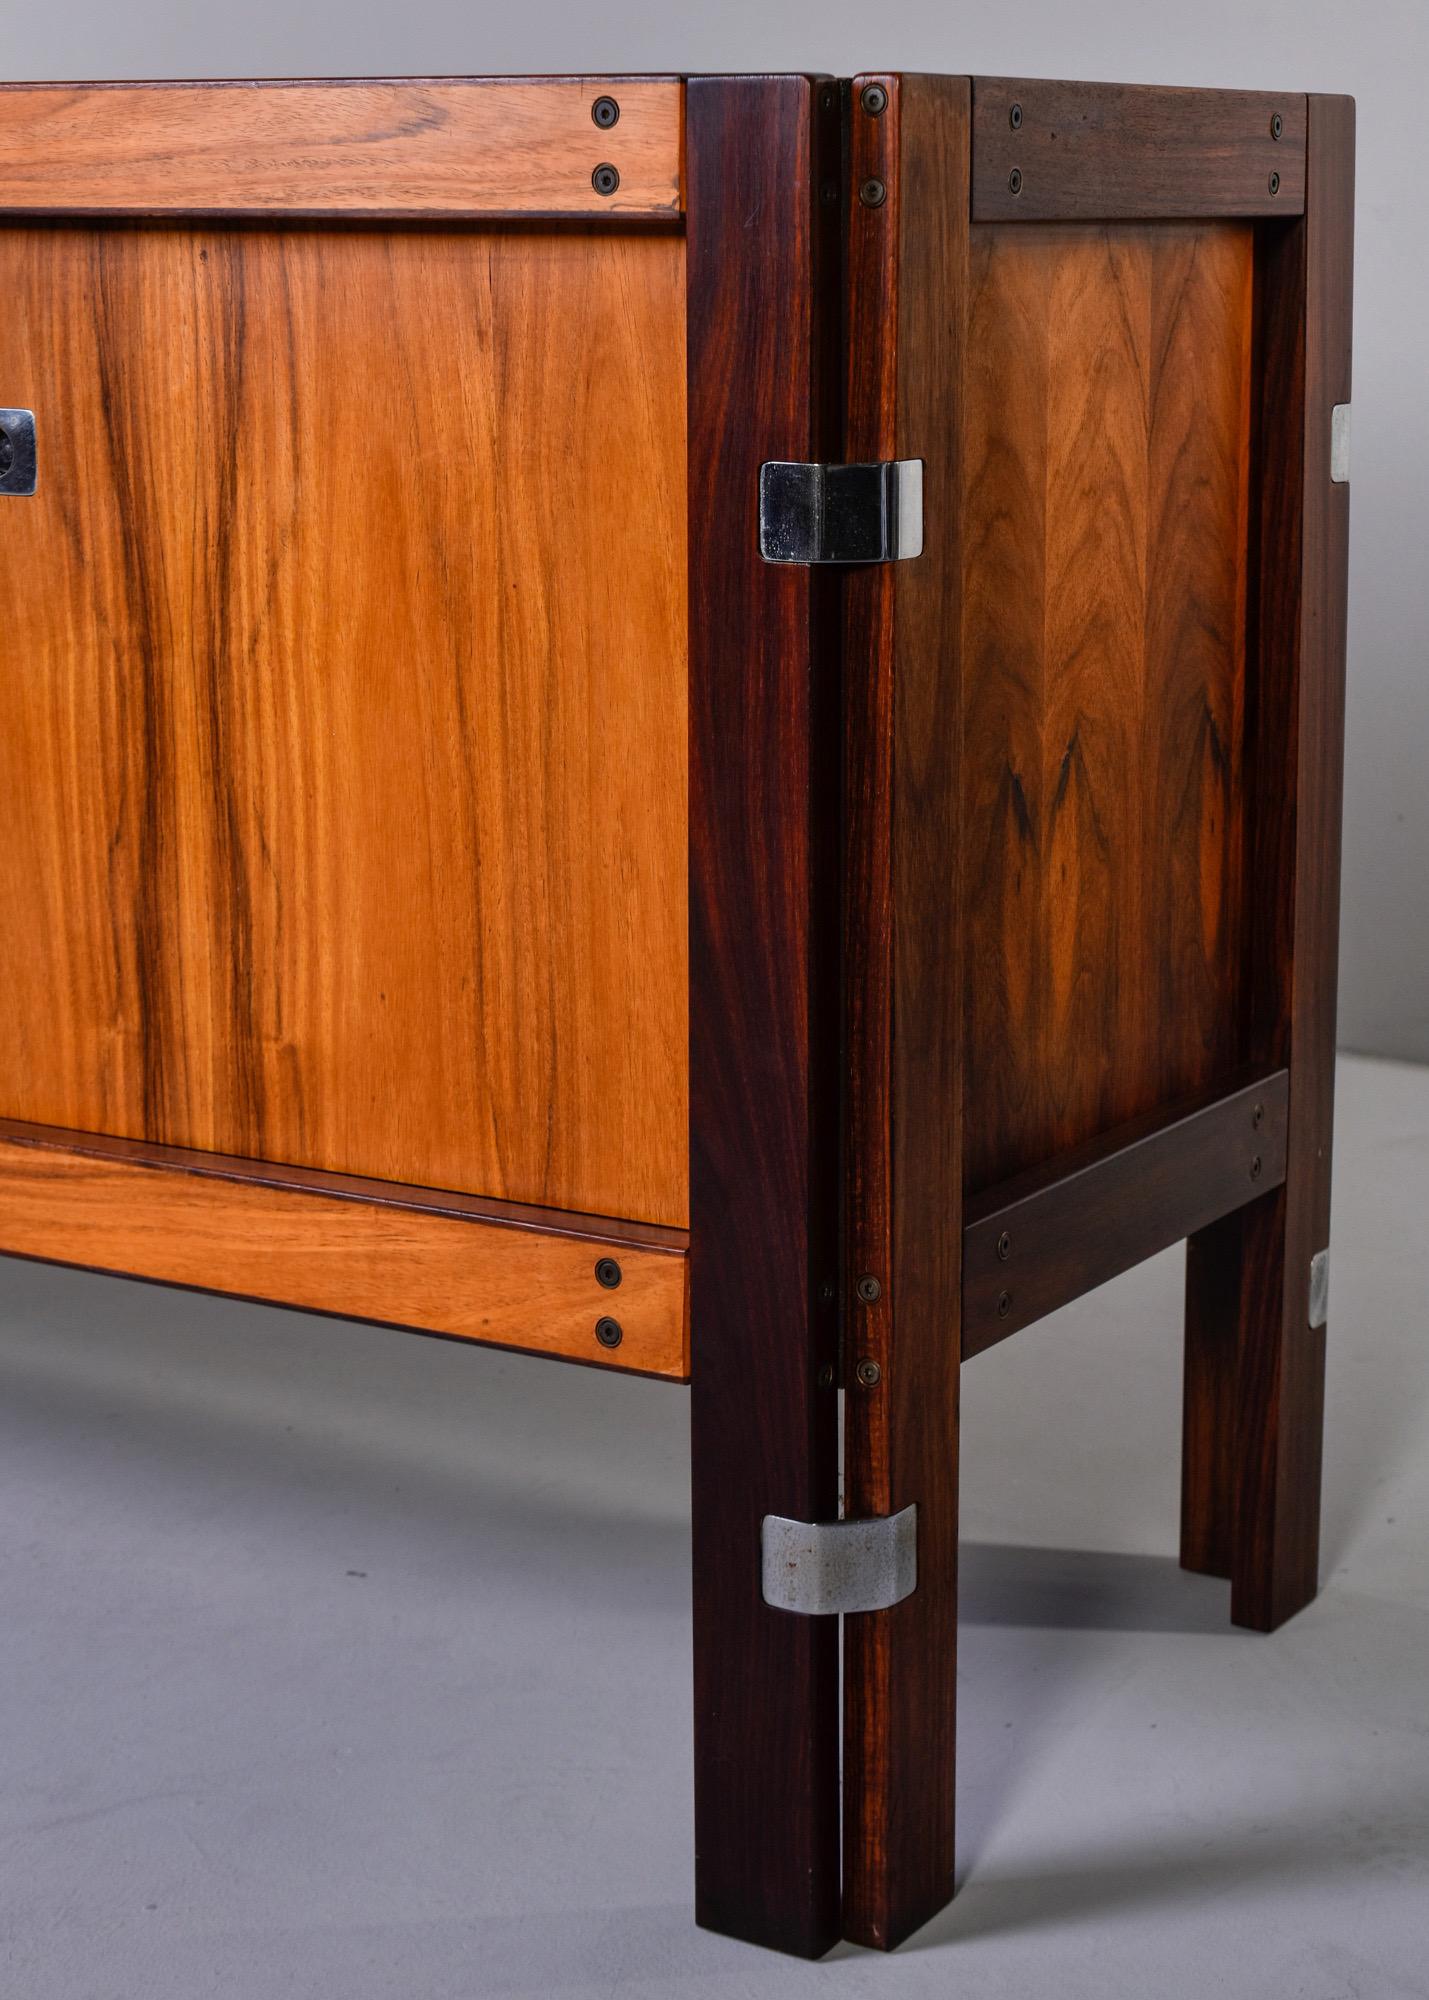 20th Century Midcentury Scandinavian Two-Tone Rosewood Buffet Credenza with Nickel Hardware